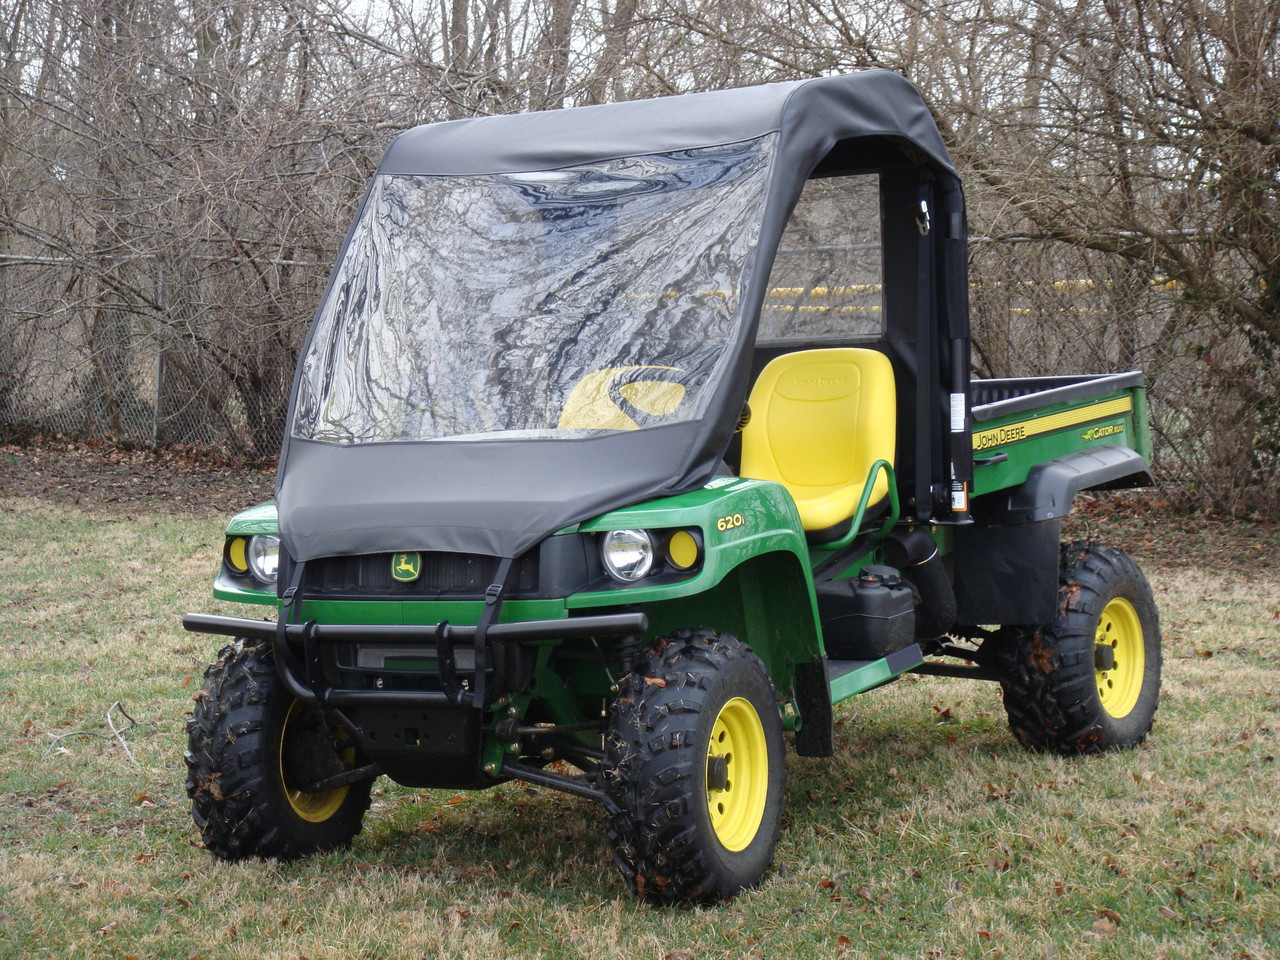 3 Star side x side John Deere HPX/XUV vinyl windshield and top side and front angle view